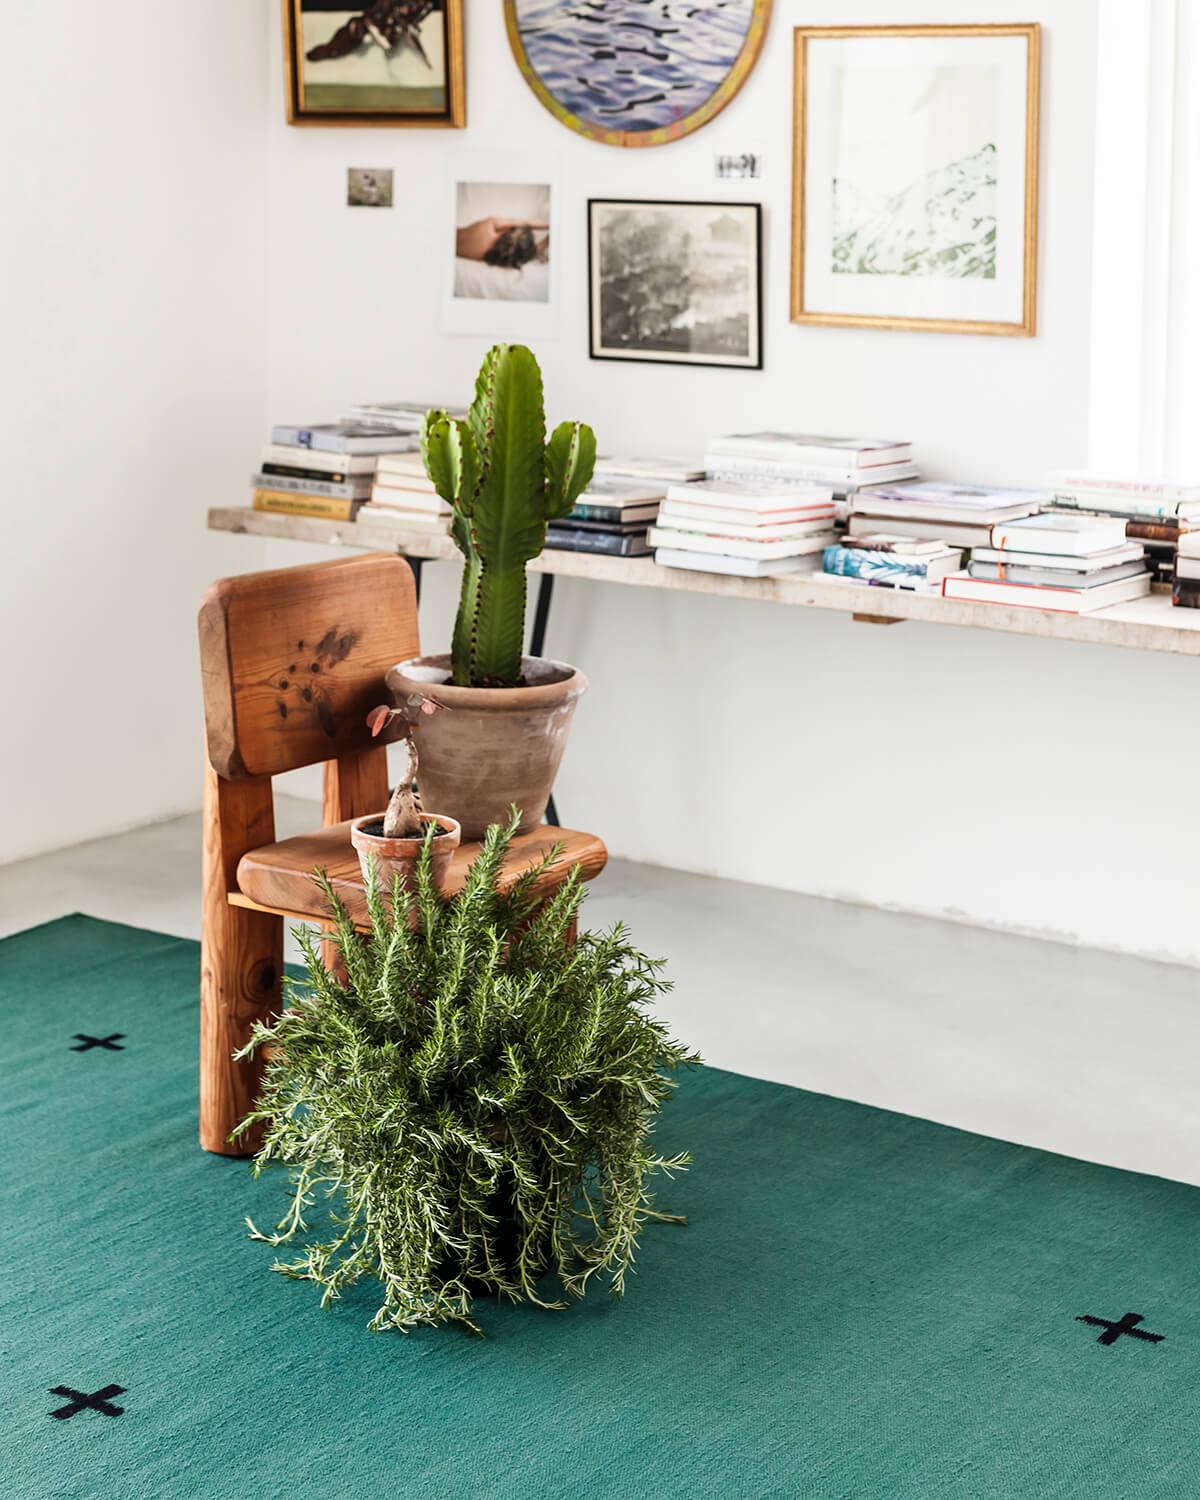 Plus green/black is a modern Dhurrie/Kilim rug in Scandinavian design.
Please note that lead times vary by size and range from 6 days - 9 weeks.

This contemporary design has a minimalist aesthetic with an artistic touch. A great complement to